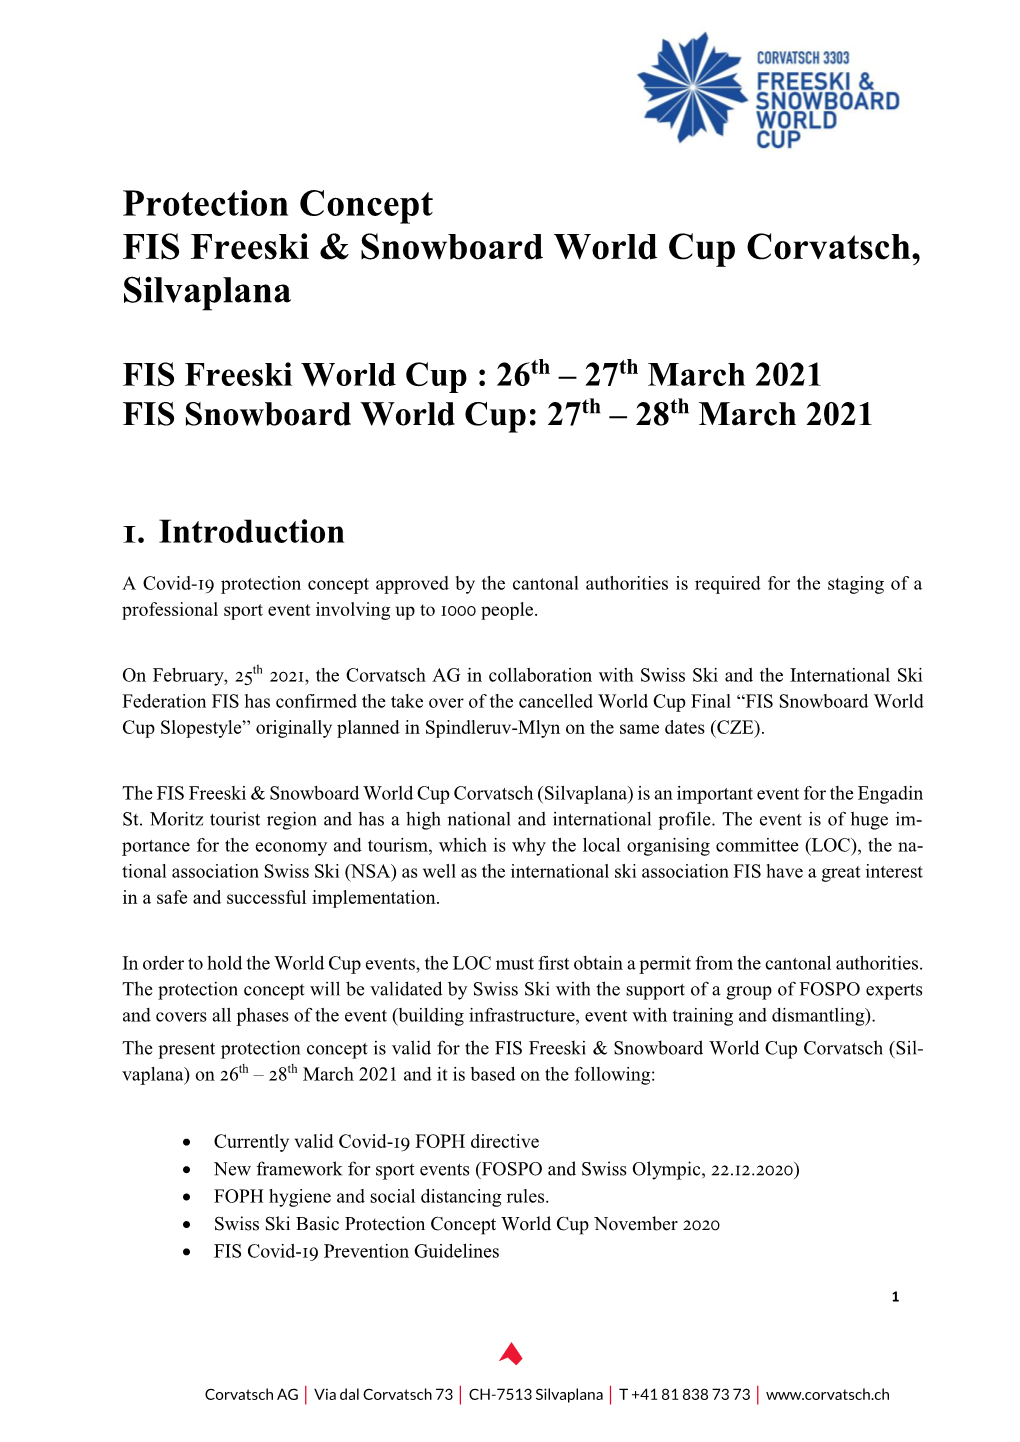 Protection Concept FIS Freeski & Snowboard World Cup Corvatsch